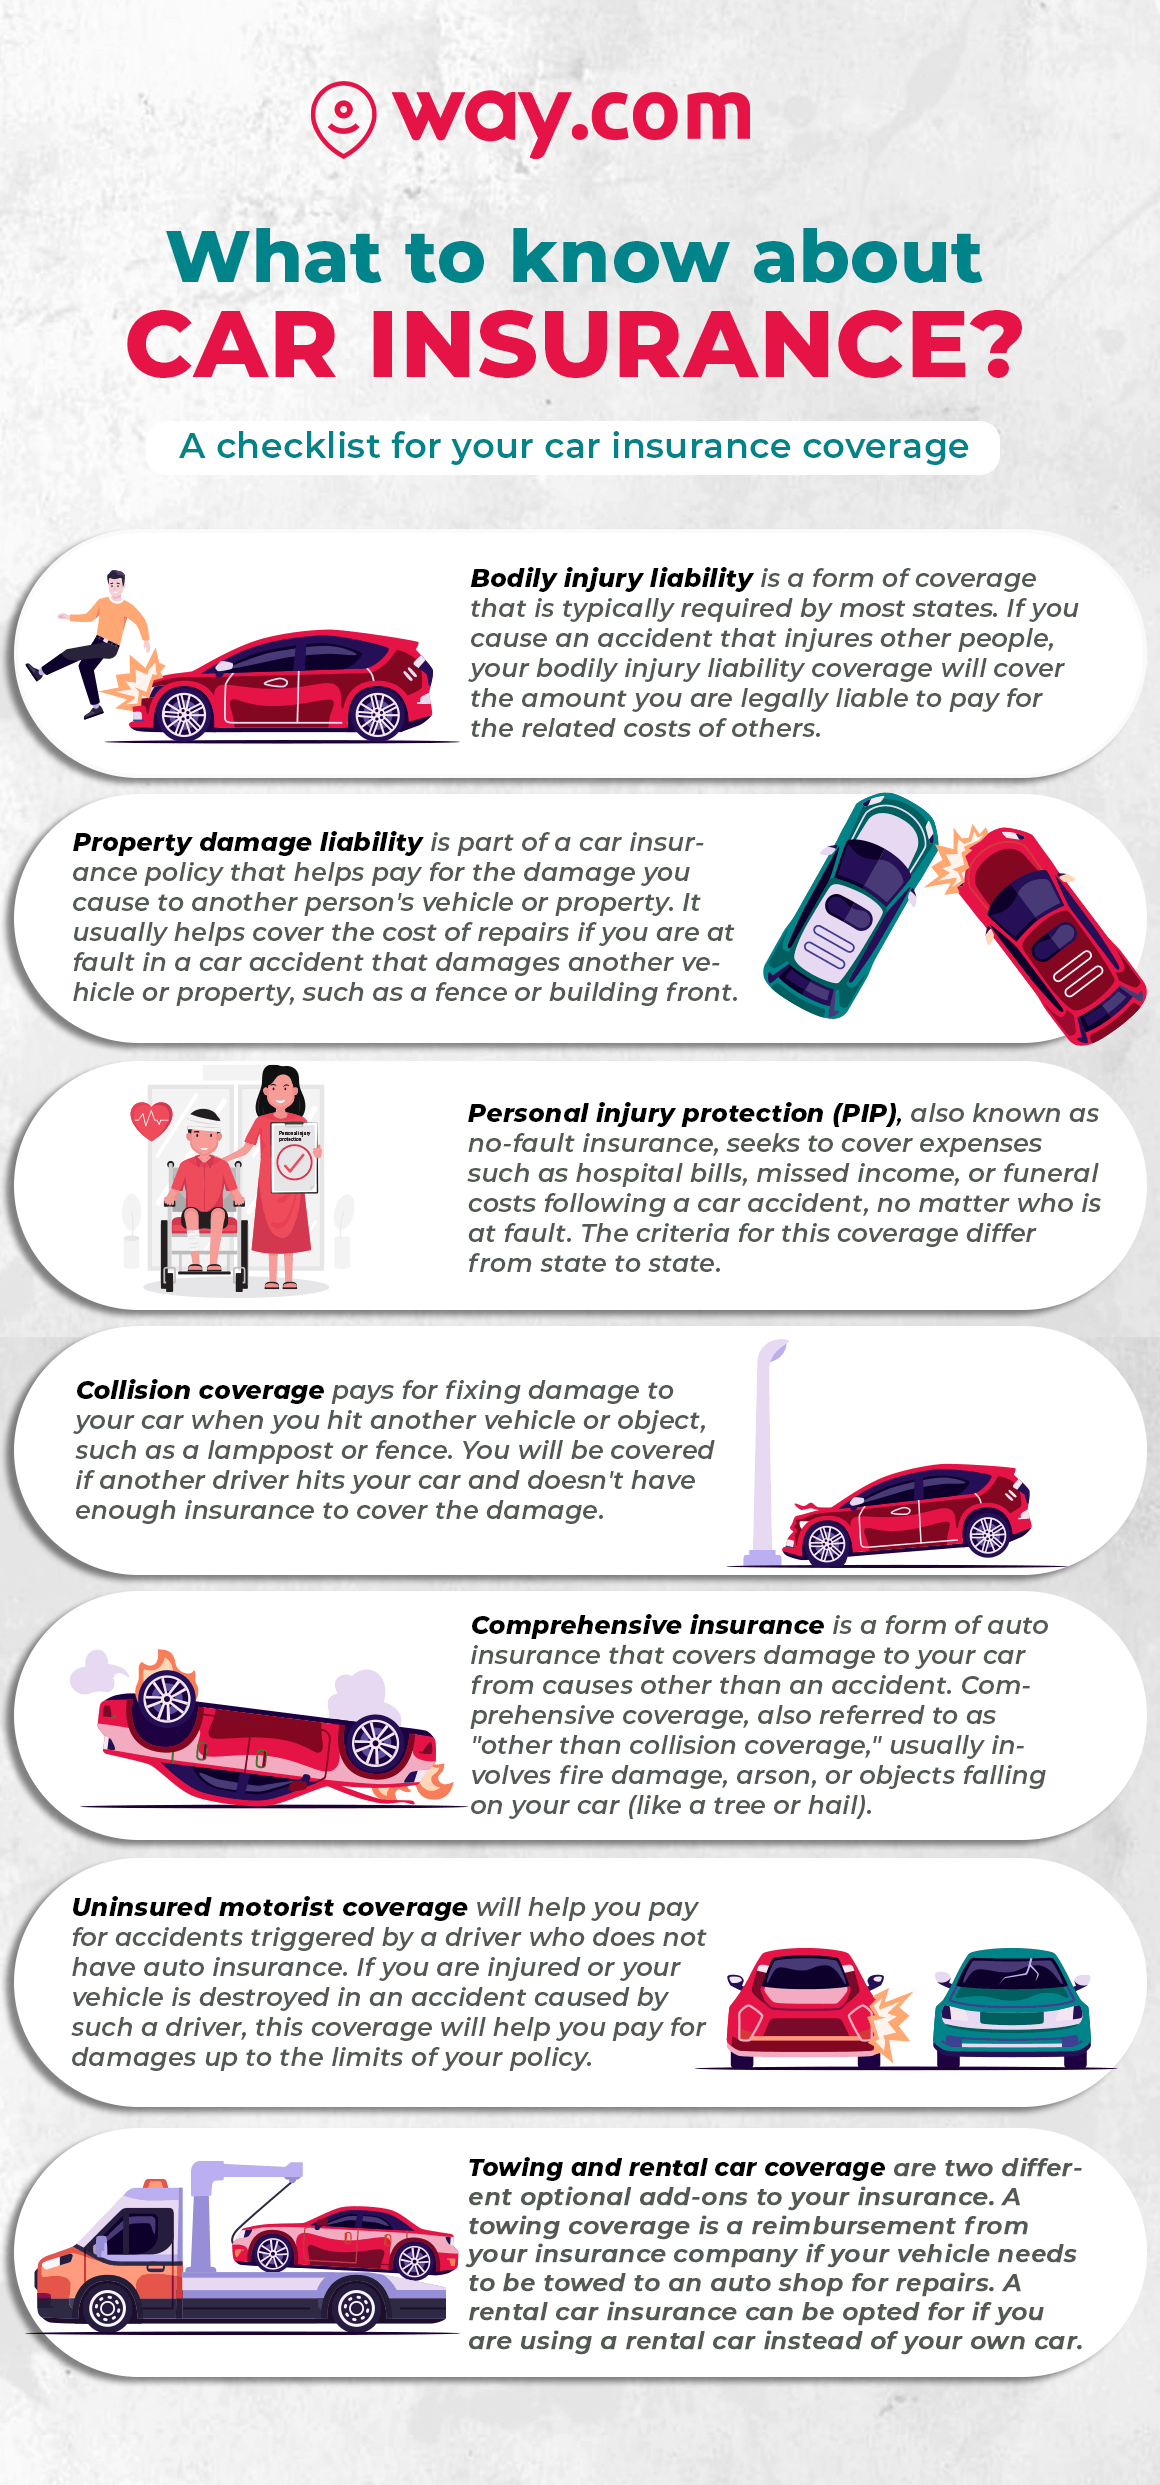 TYPES OF CAR INSURANCE